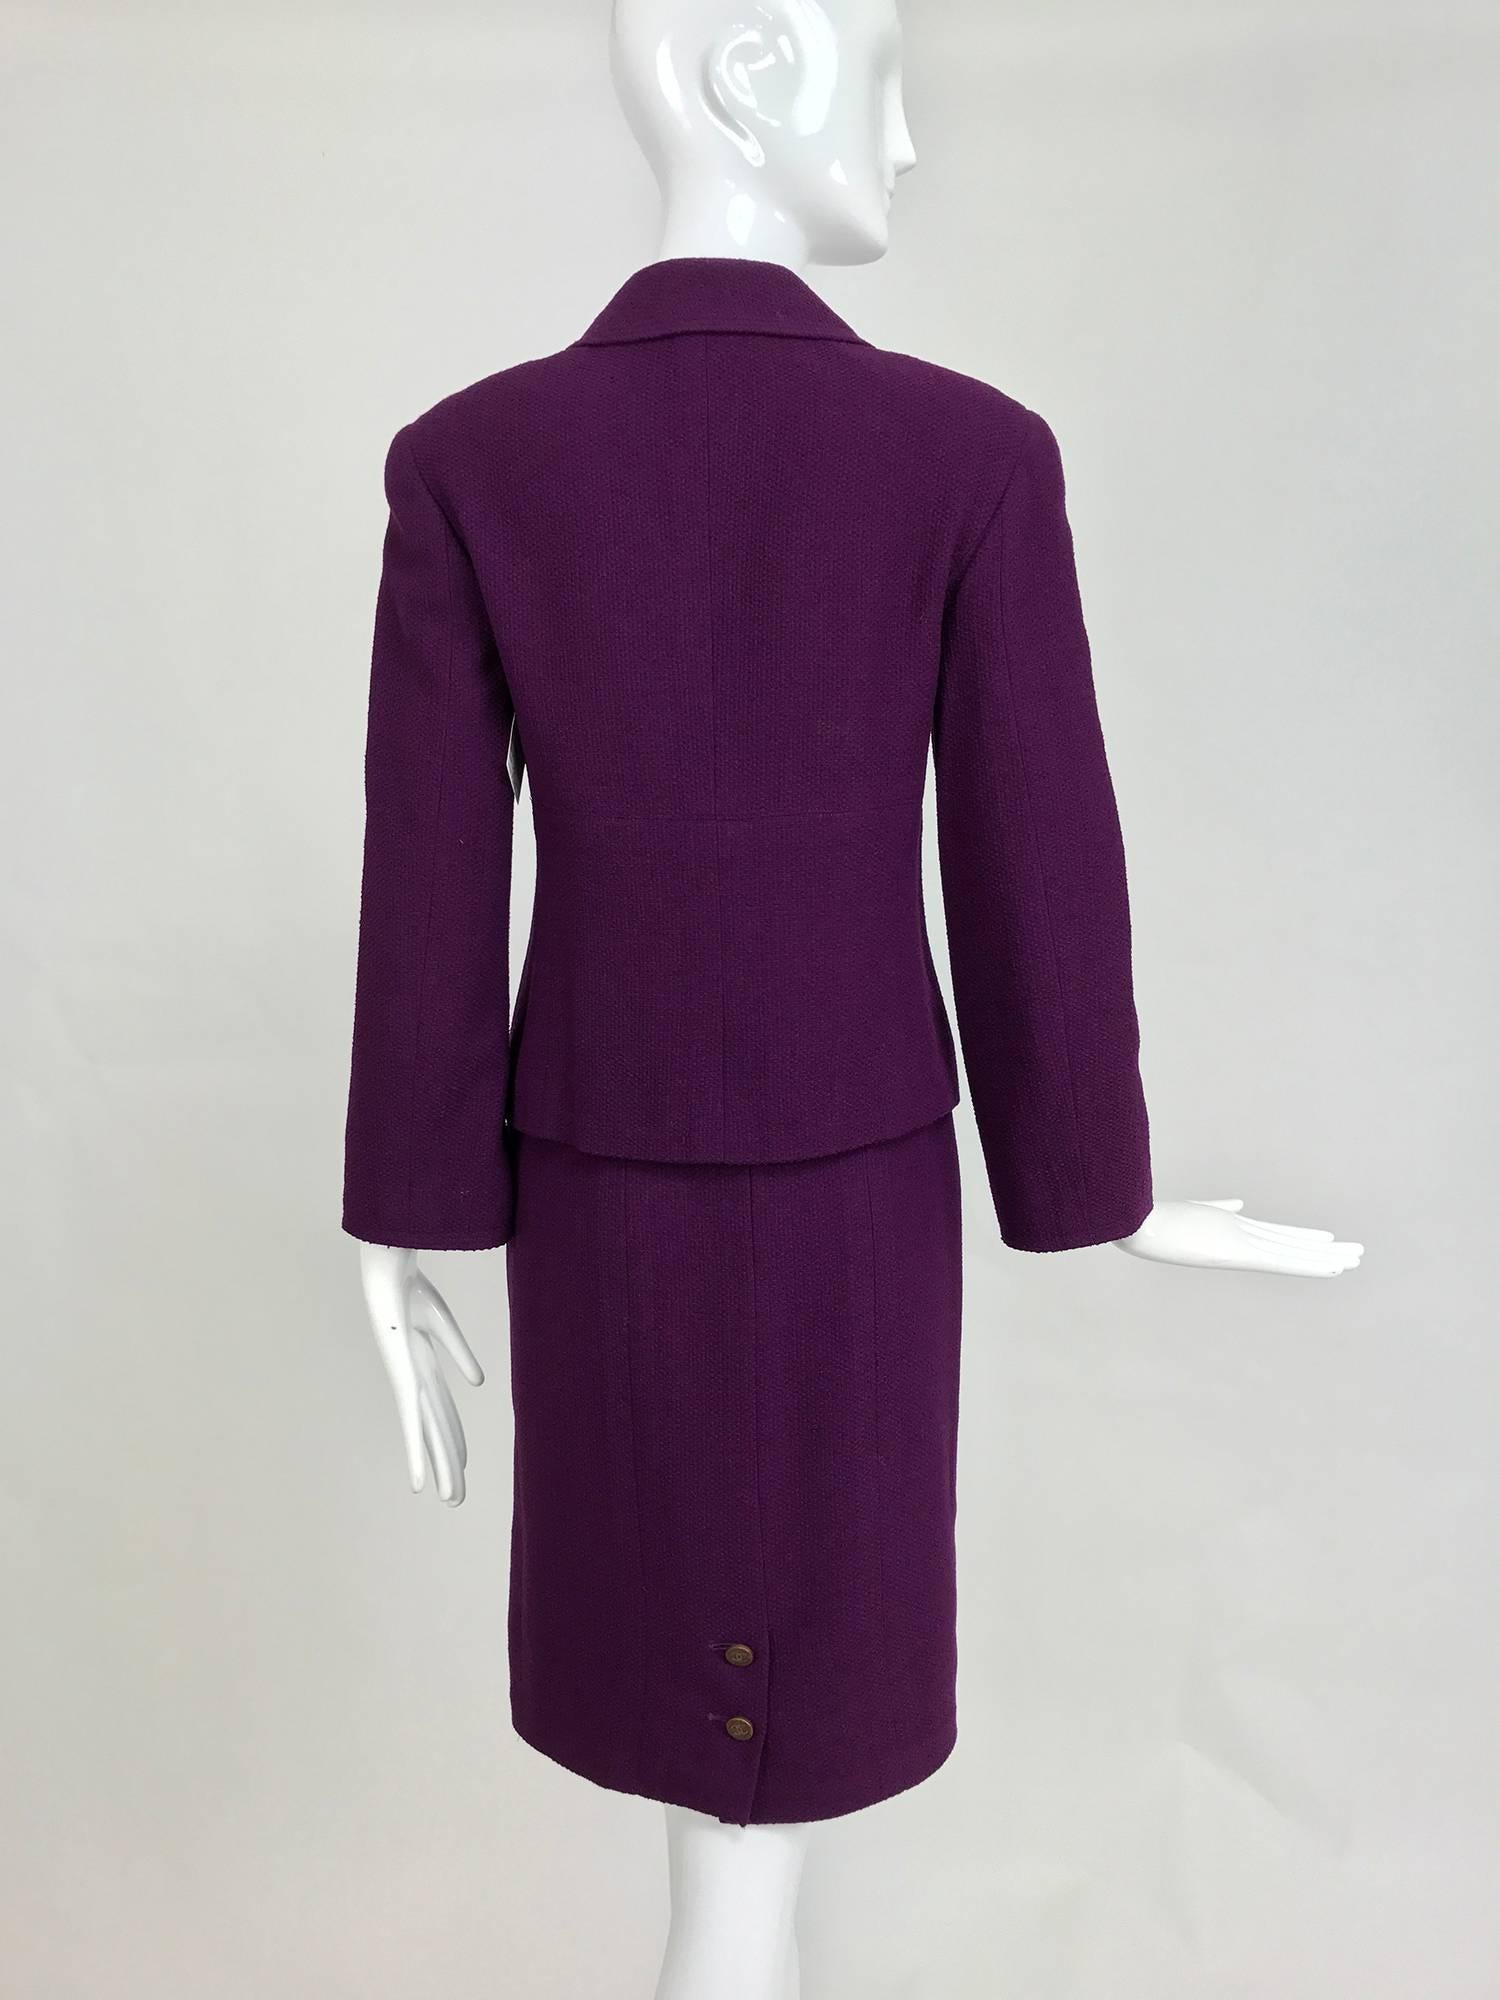 Purple Chanel aubergine boucle classic double breasted skirt suit 1998A For Sale